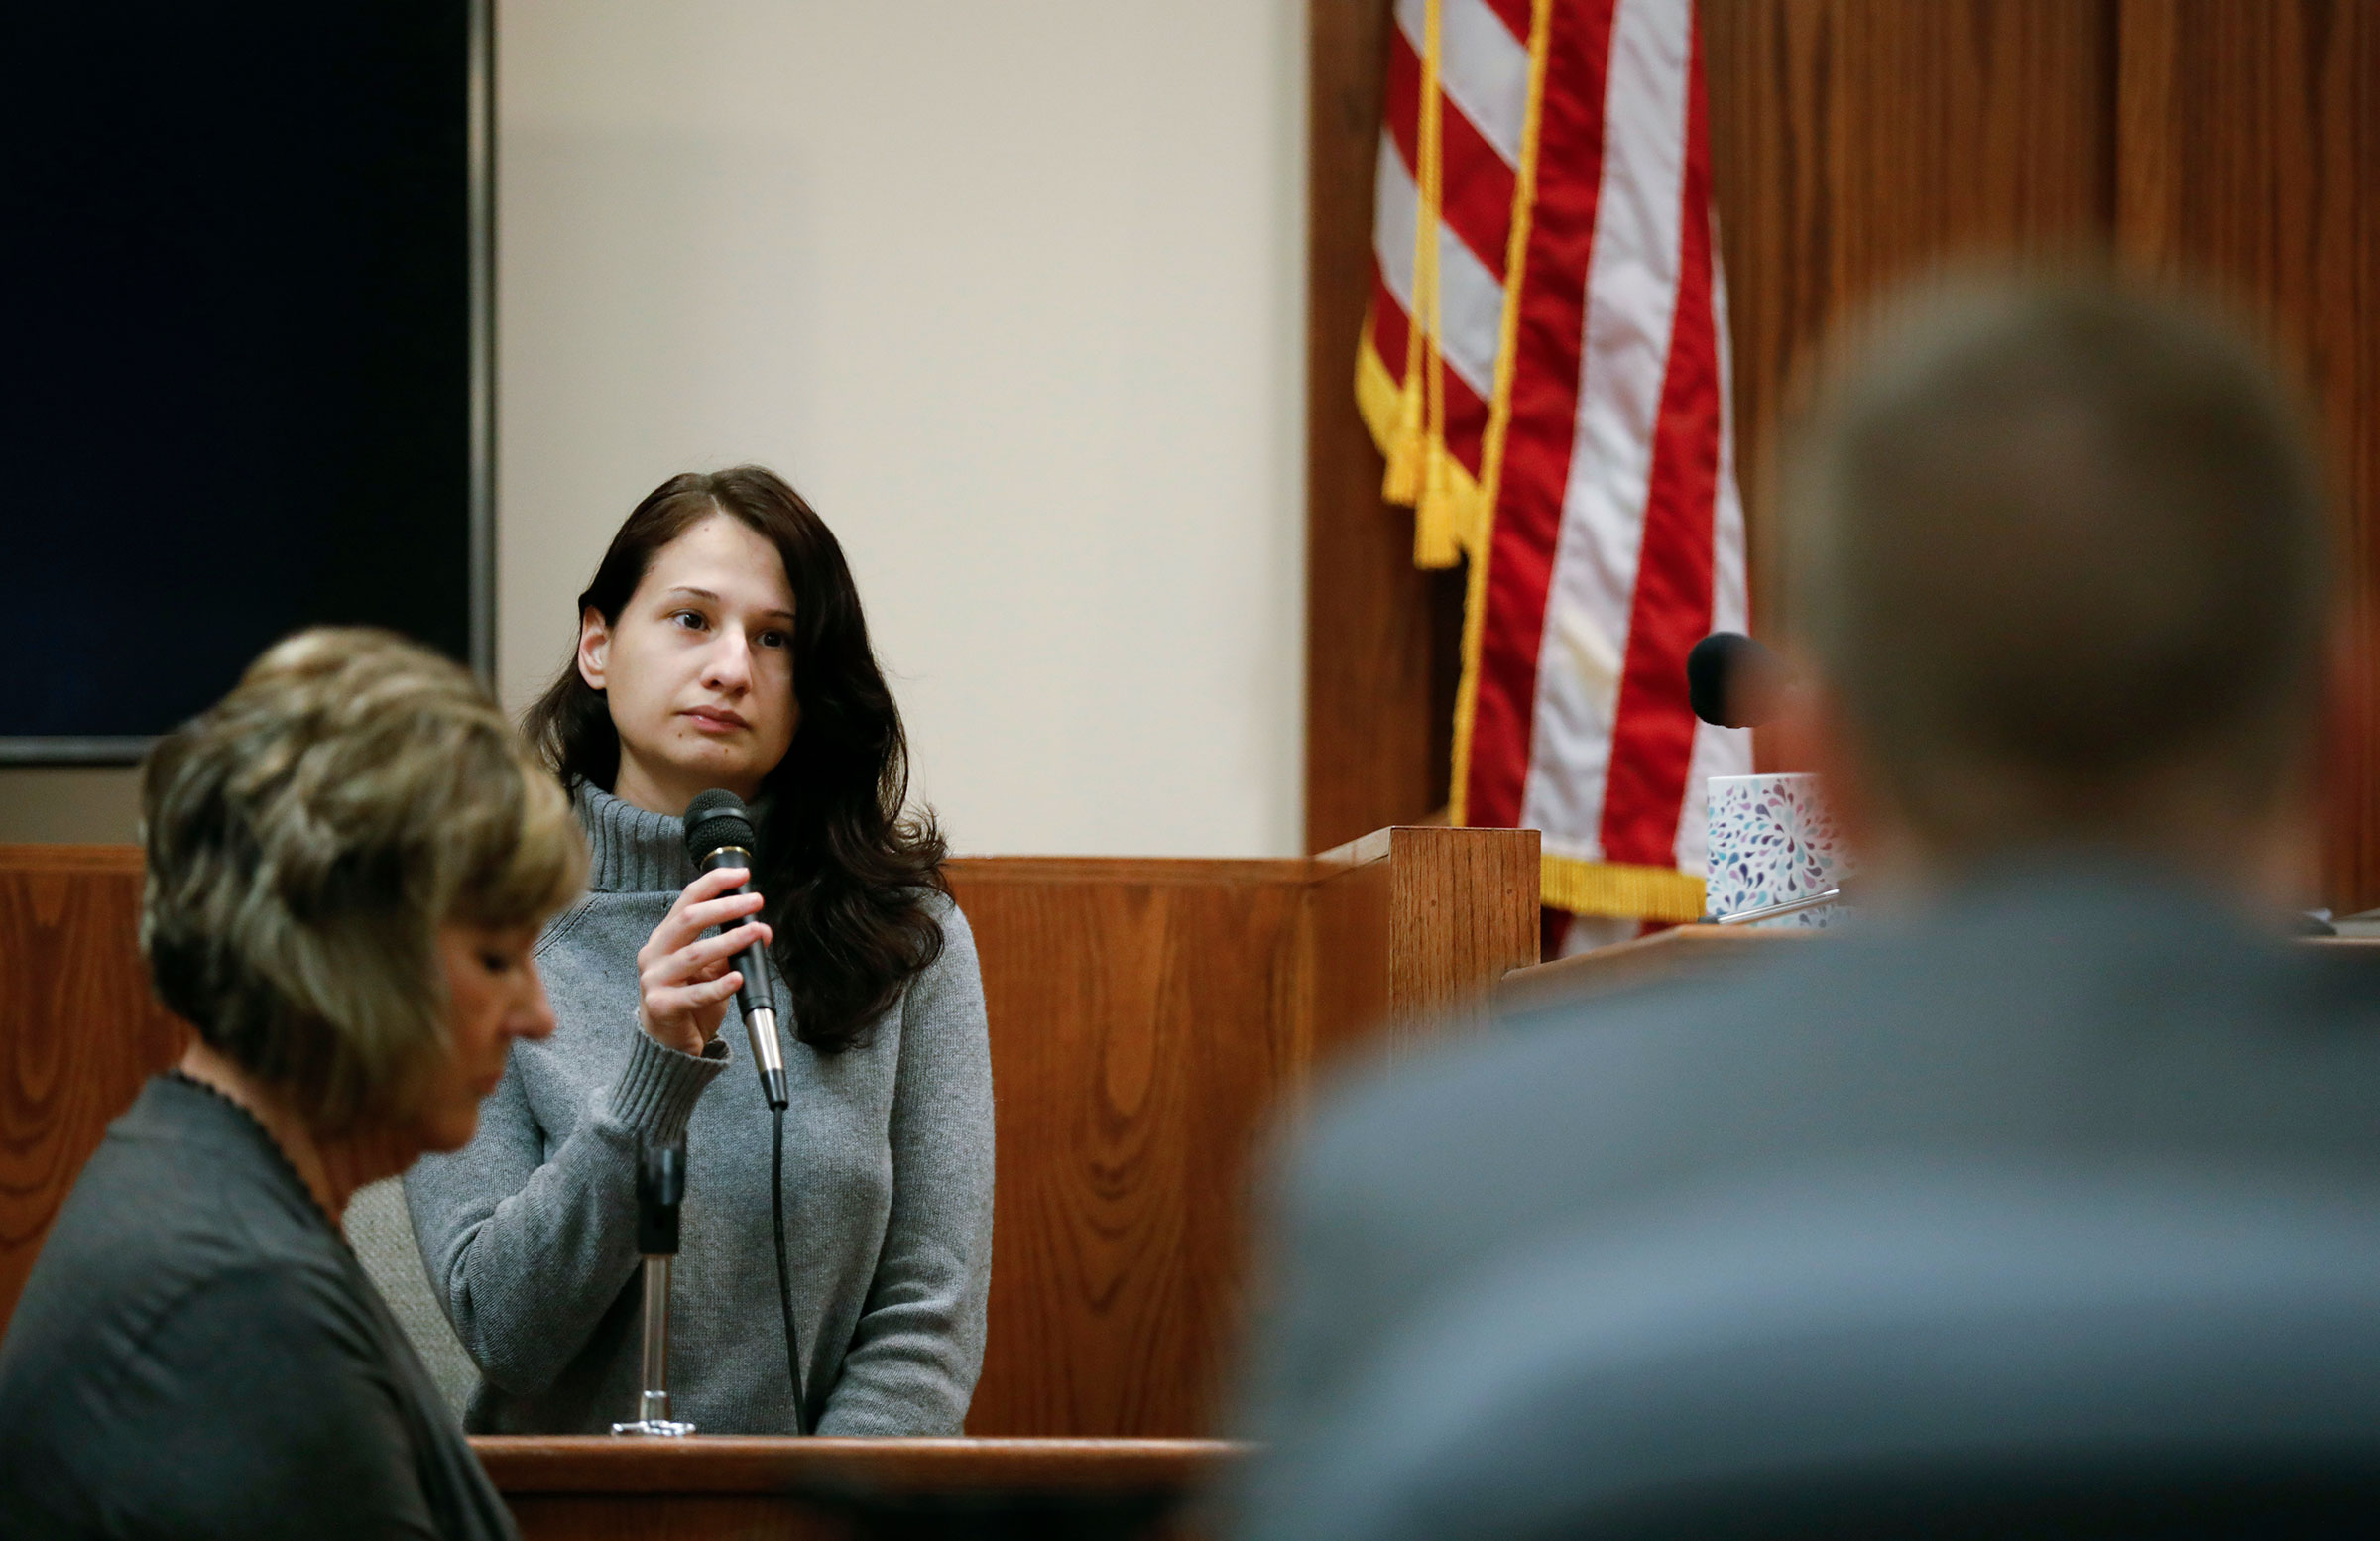 Gypsy Rose Blanchard takes the stand during the trial of her ex-boyfriend Nicholas Godejohn in Springfield, Mo., on Nov. 15, 2018.